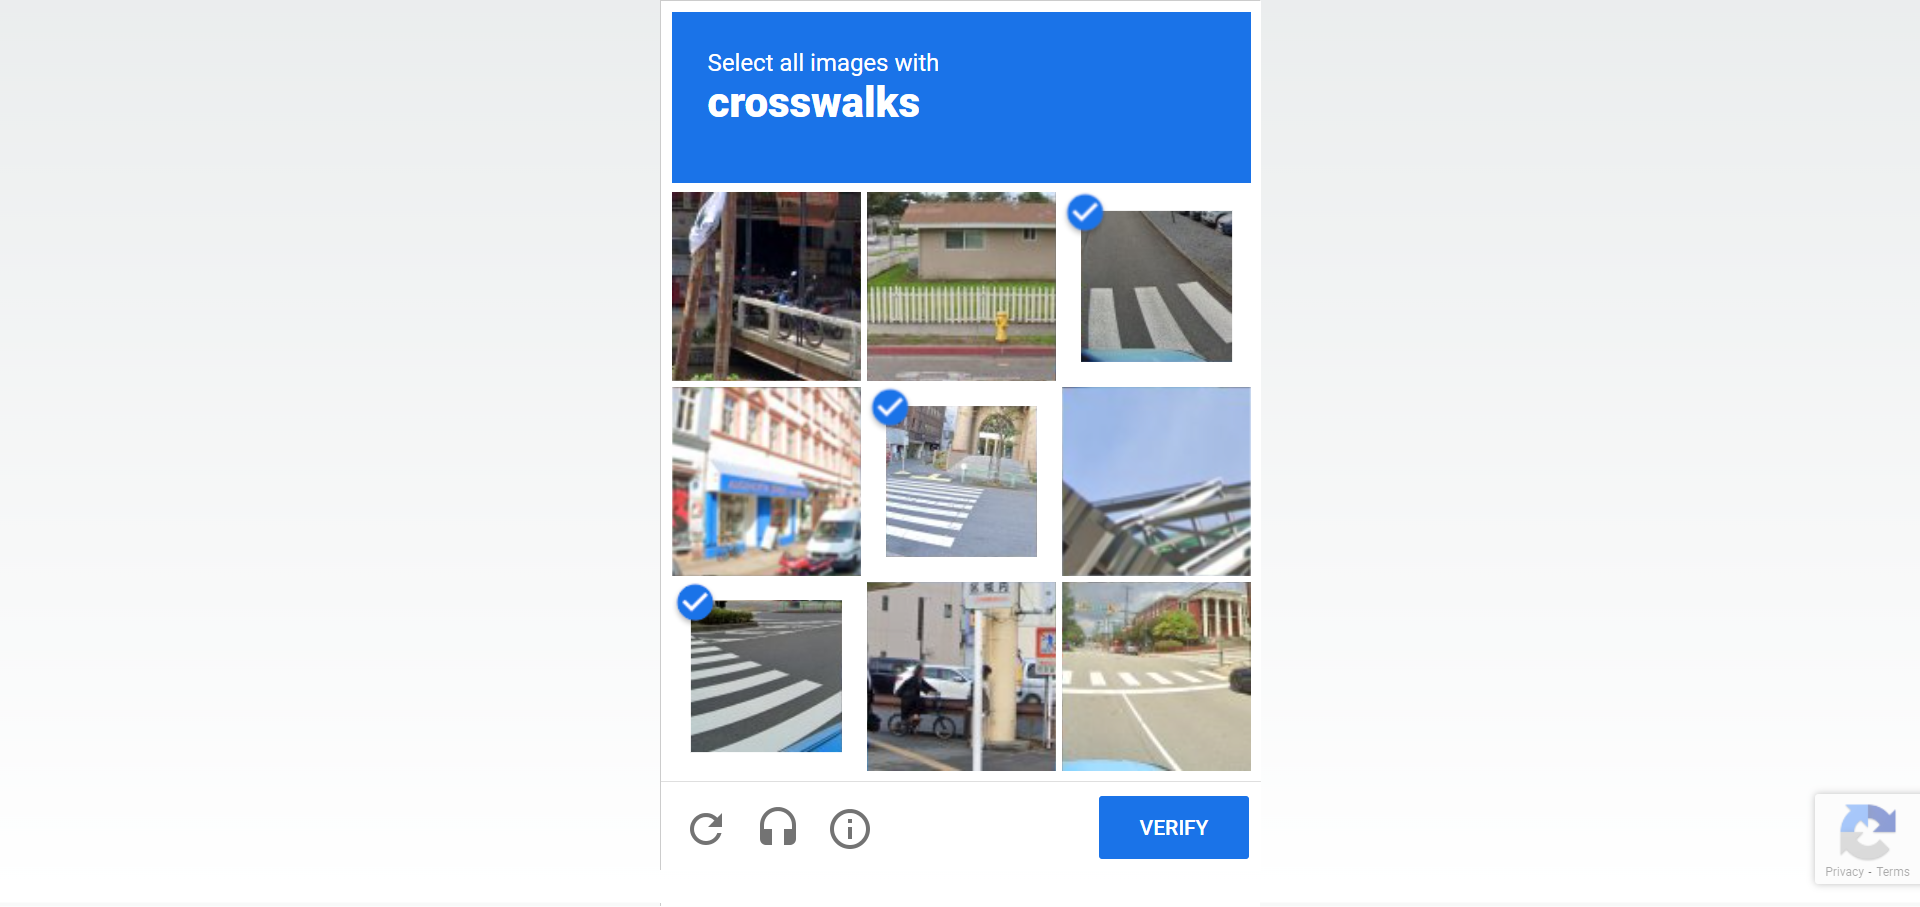 select-all-images-with-crosswalks-recaptcha-v2-example